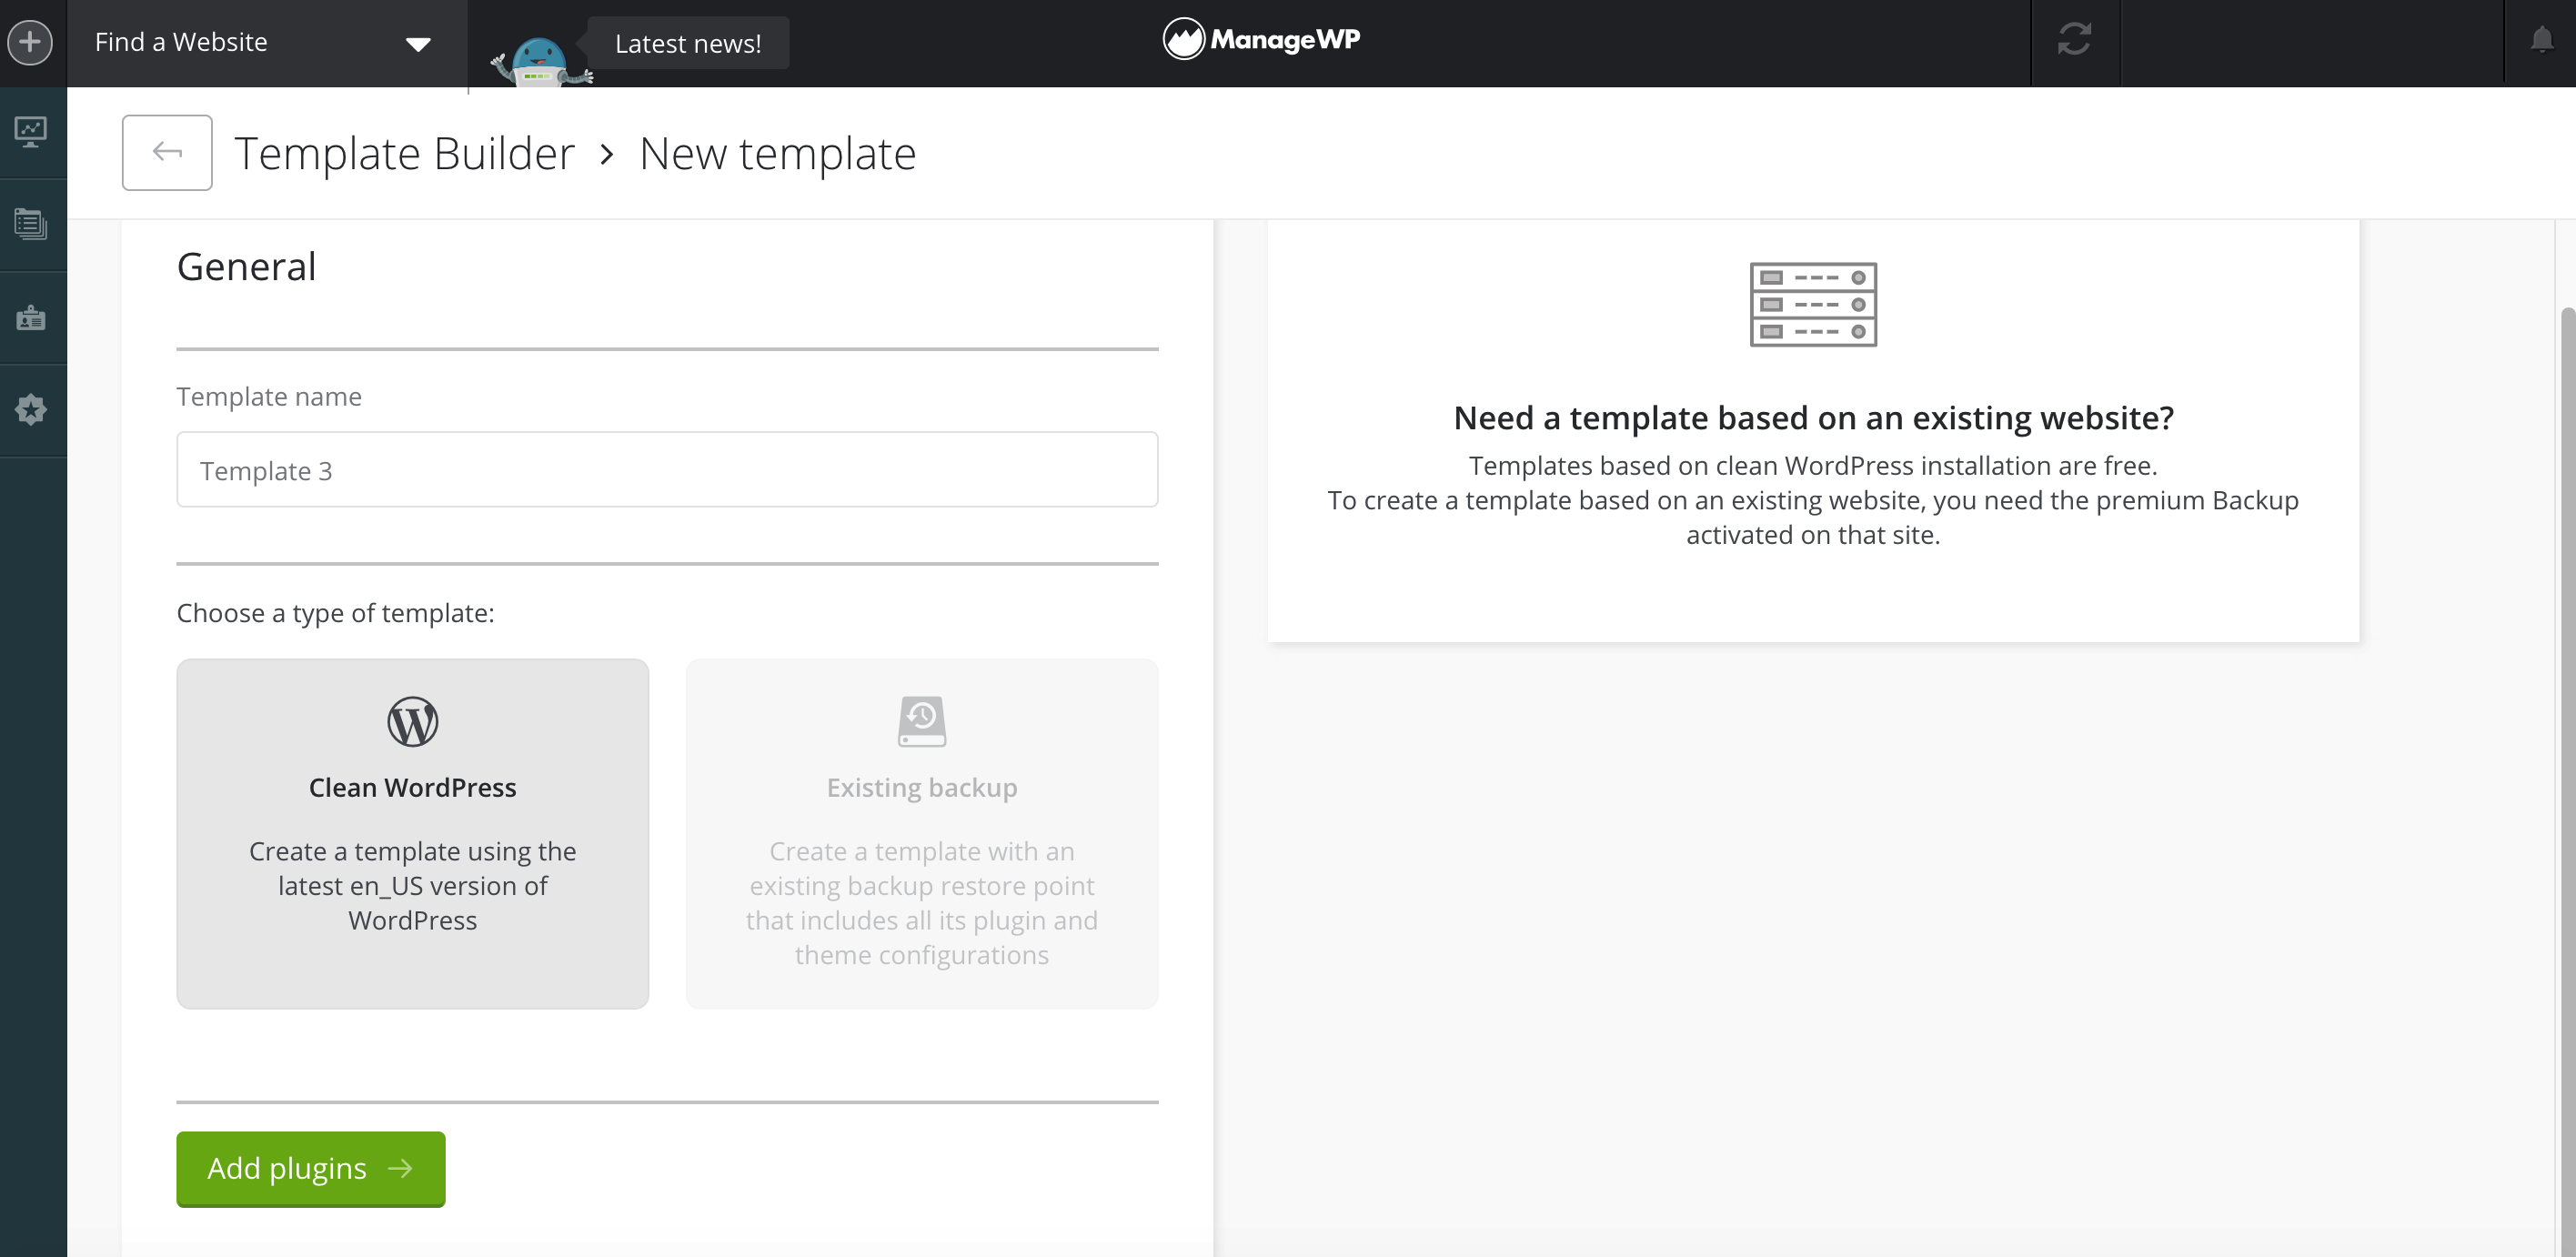 ManageWP's template builder dashboard.